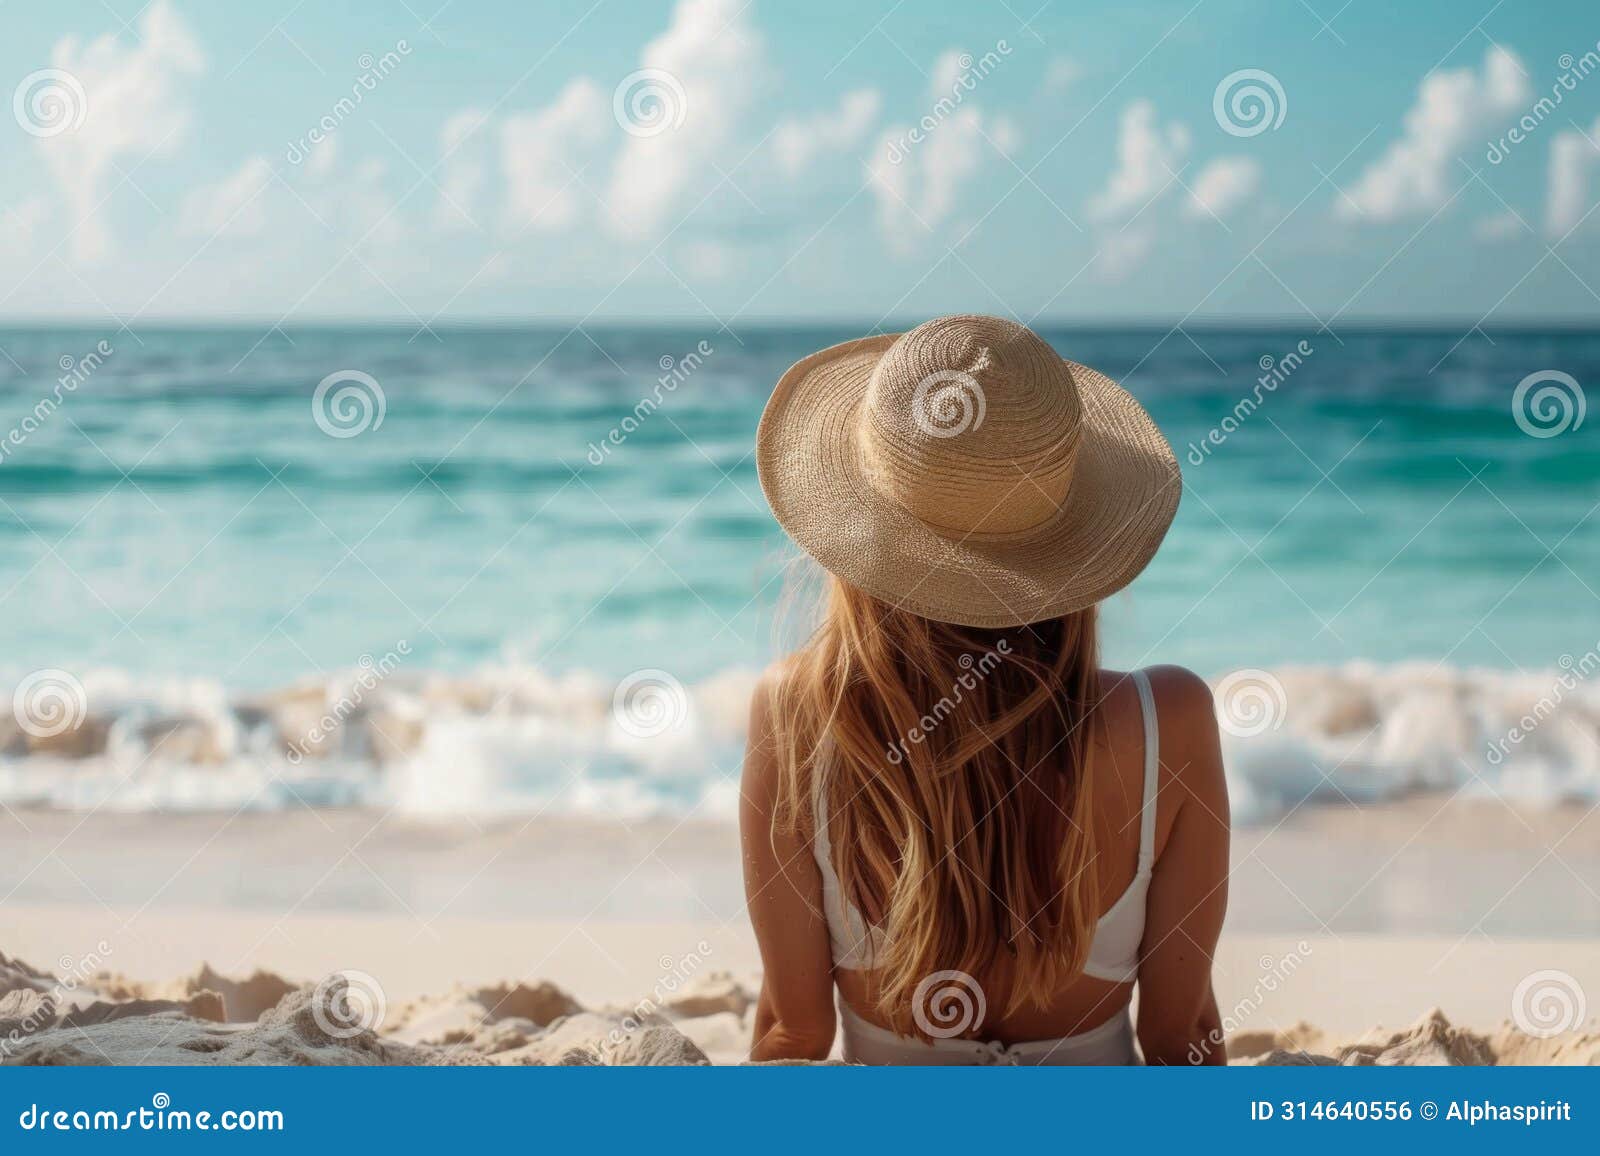 woman in a sunhat relaxing on the sandy shore, gazing at the tranquil ocean